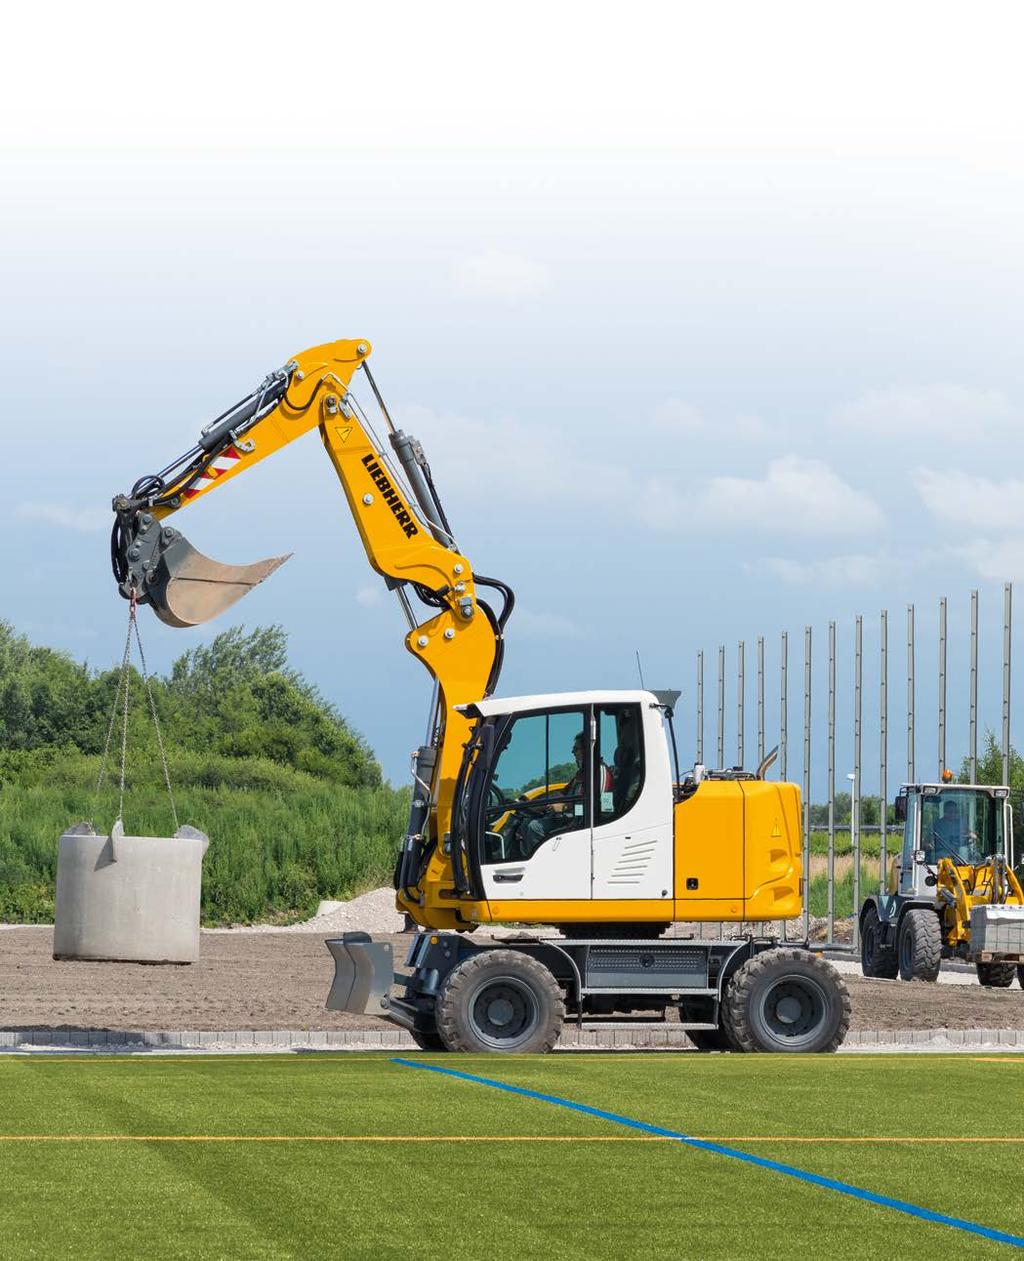 Liebherr specialist machines for horticultural and landscape construction For machines used in horticultural and landscape construction, the bottom line is ensuring high mobility and power output